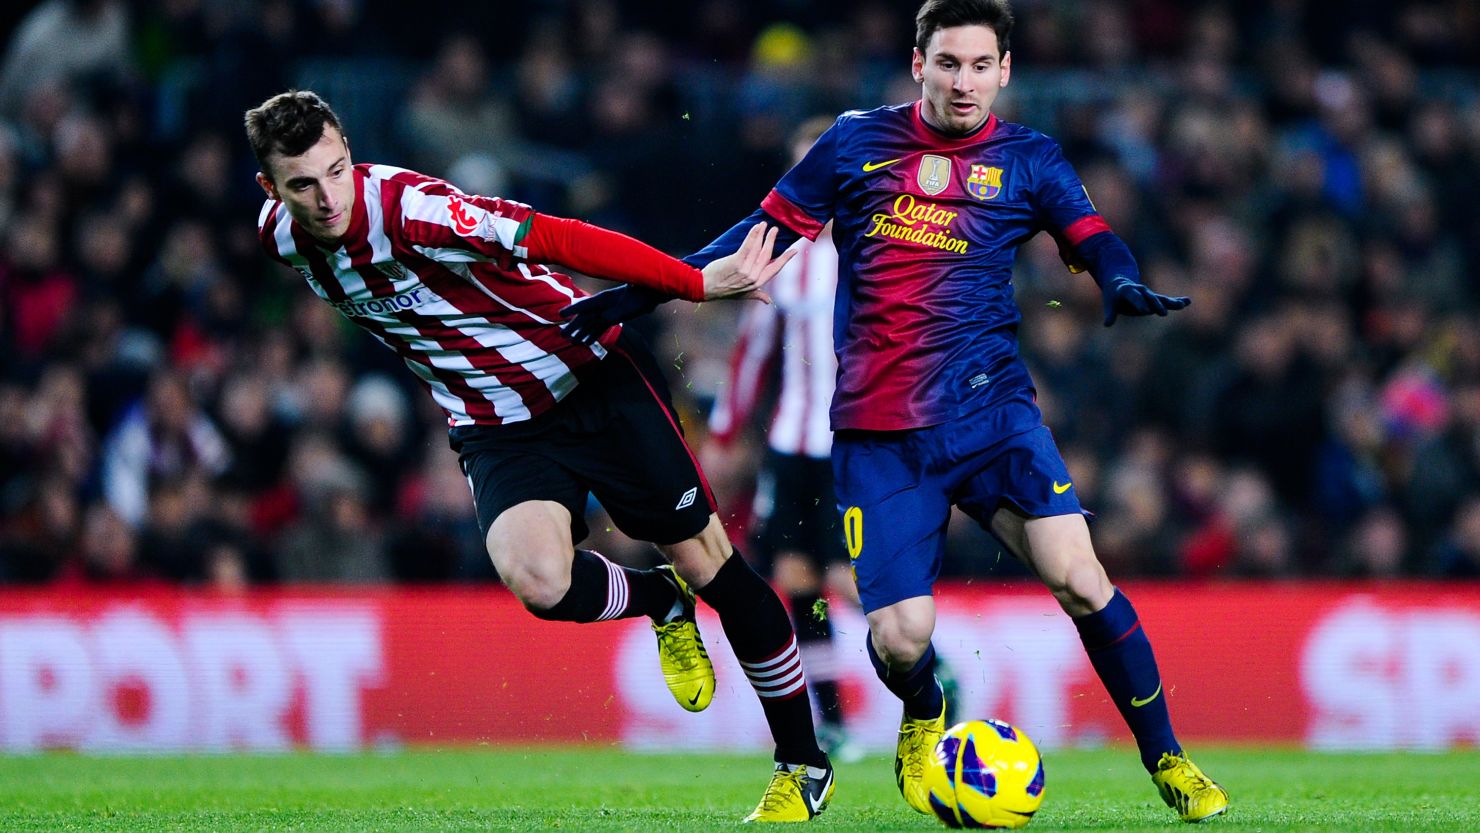 Lionel Messi's two goals against Bilbao leave him one goal away from matching a 40-year old record set by Gerd Muller. 